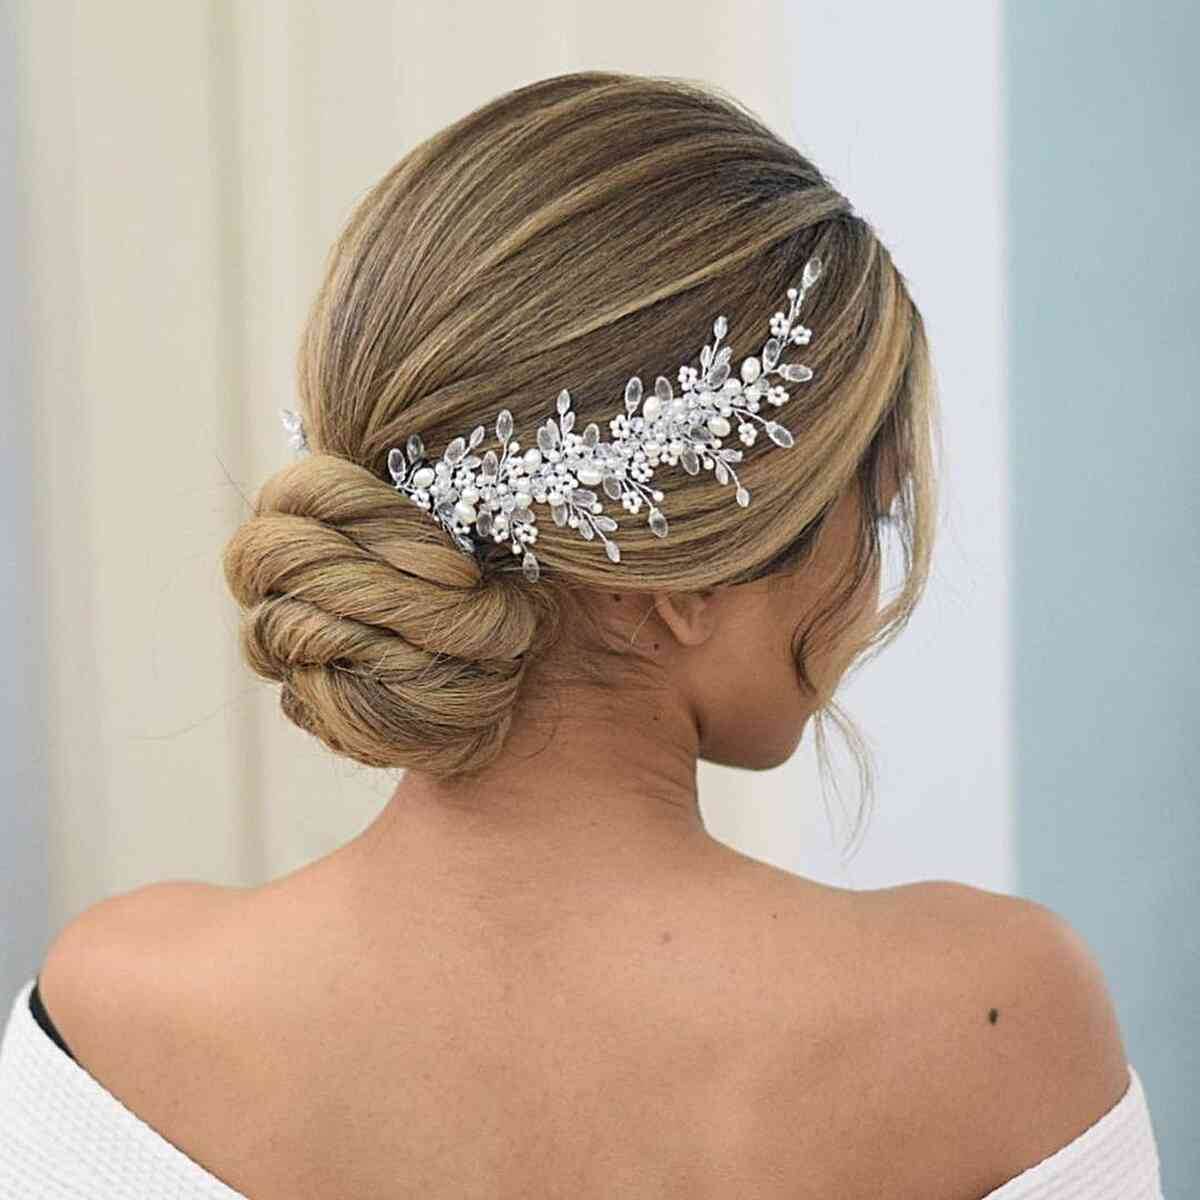 Medieval Blonde Twisted Bun with Hair Accessory